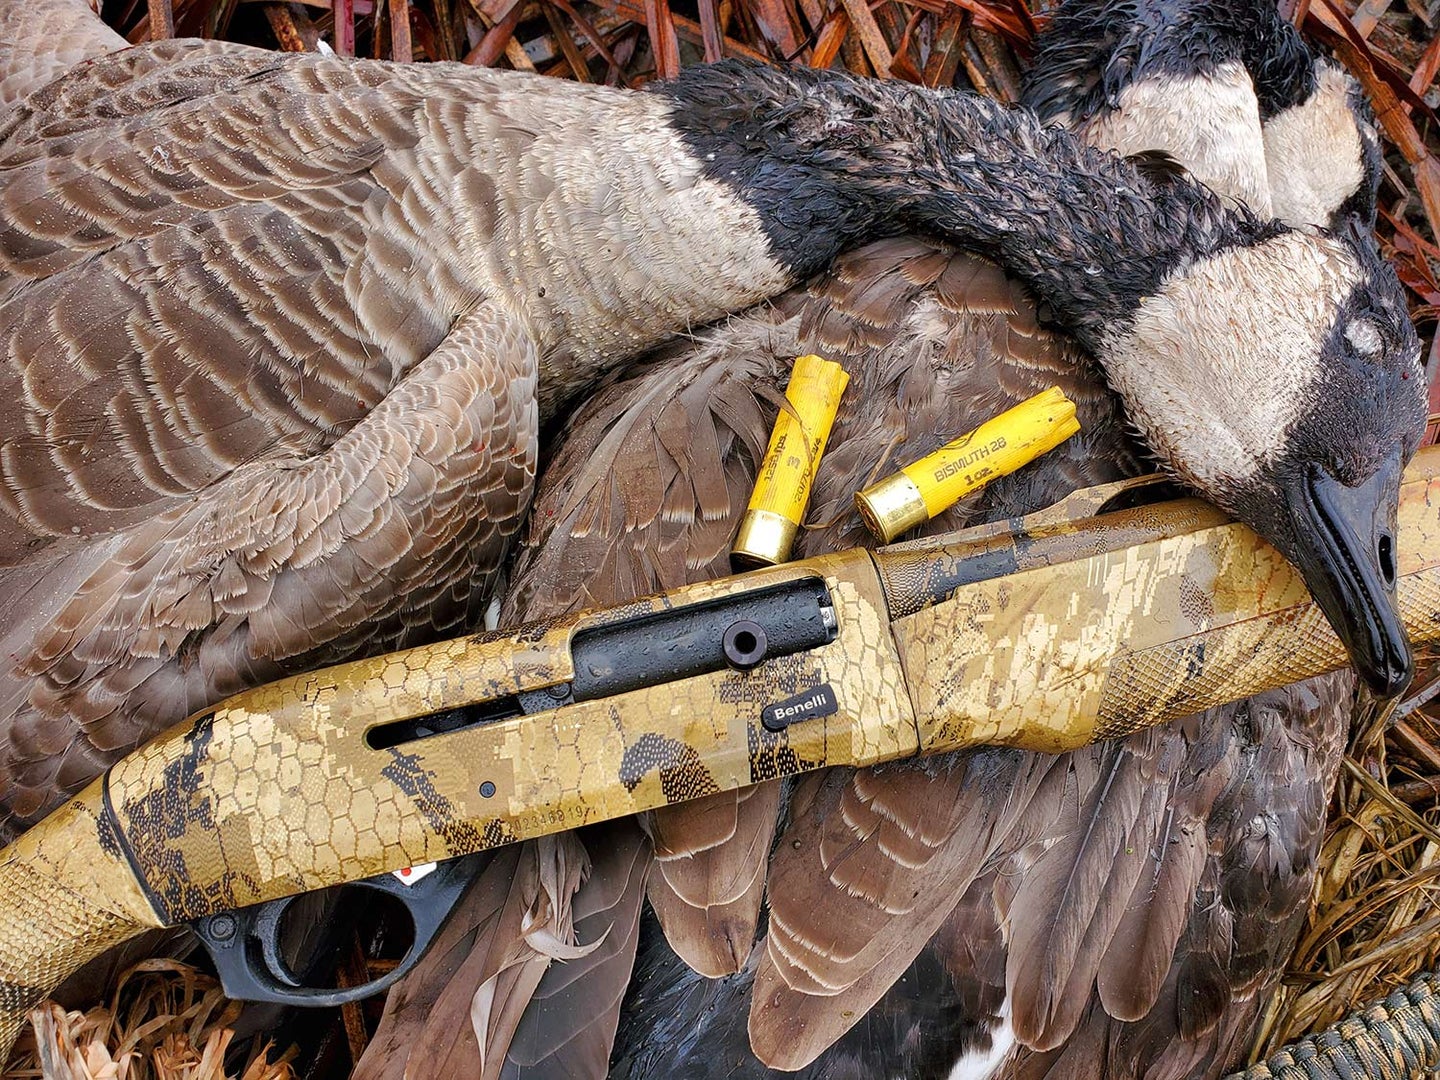 A waterfowl hunting shotgun next to a limit of geese.